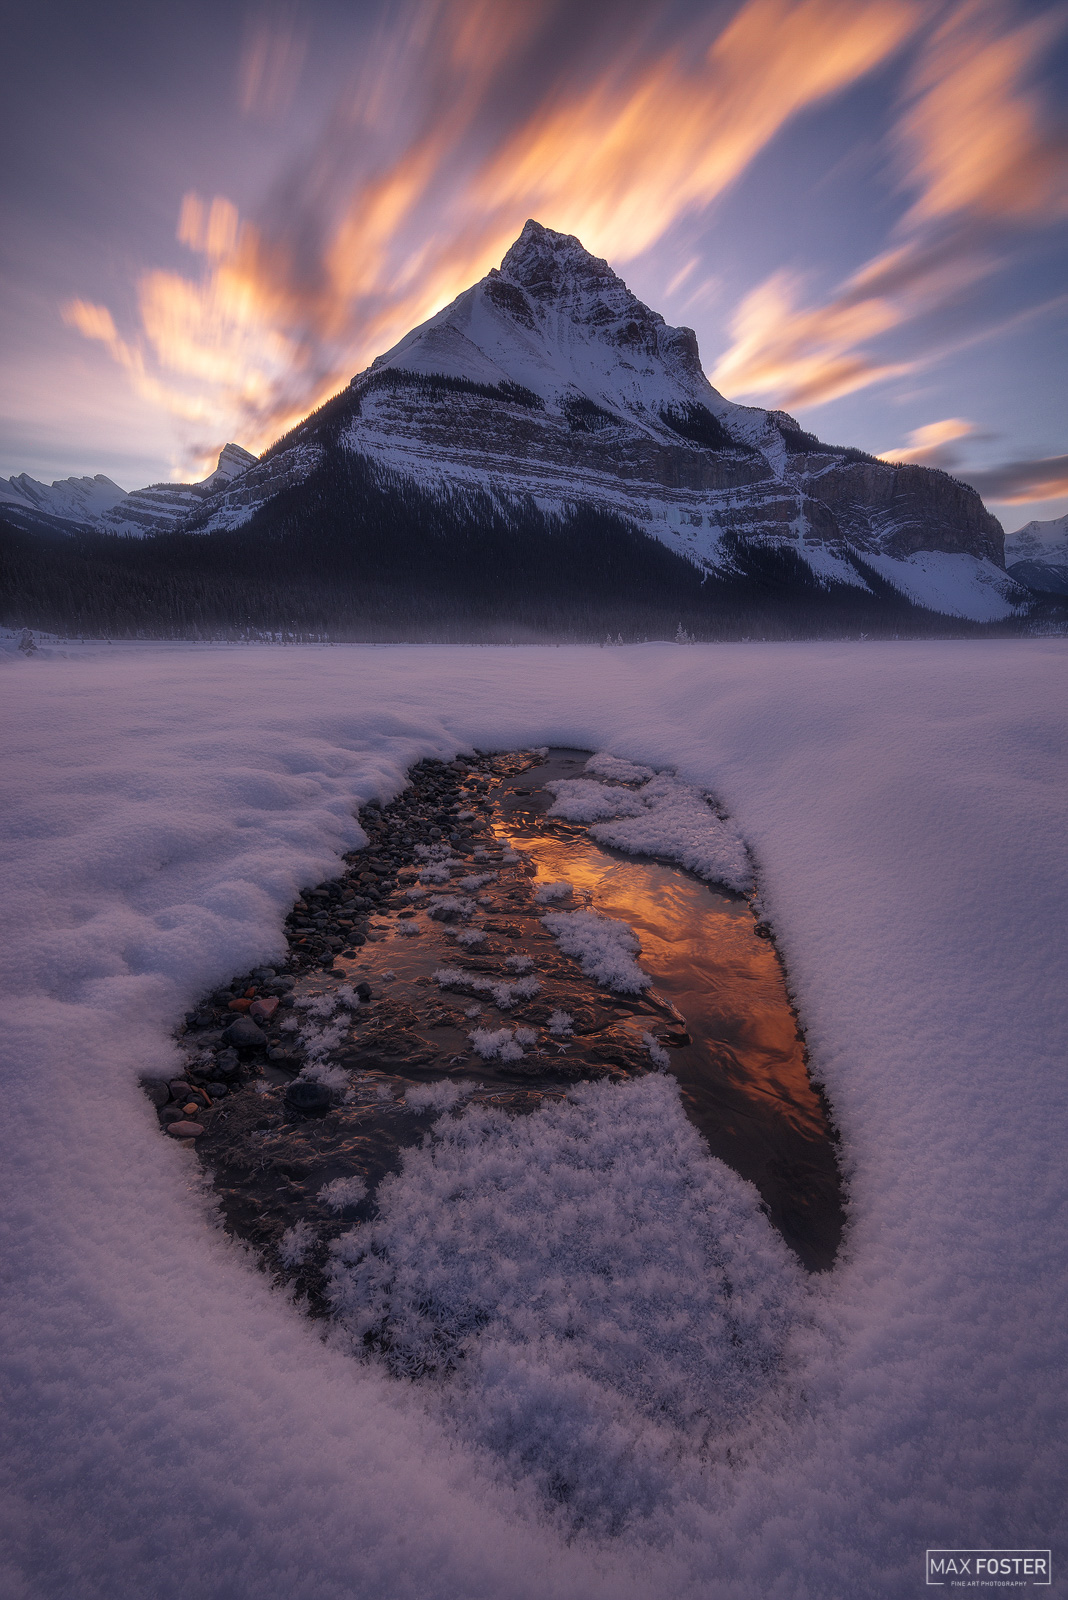 Elevate your space with Flaming Peak, Max Foster's limited edition photography print of Tangle Peak in The Canadian Rockies from...